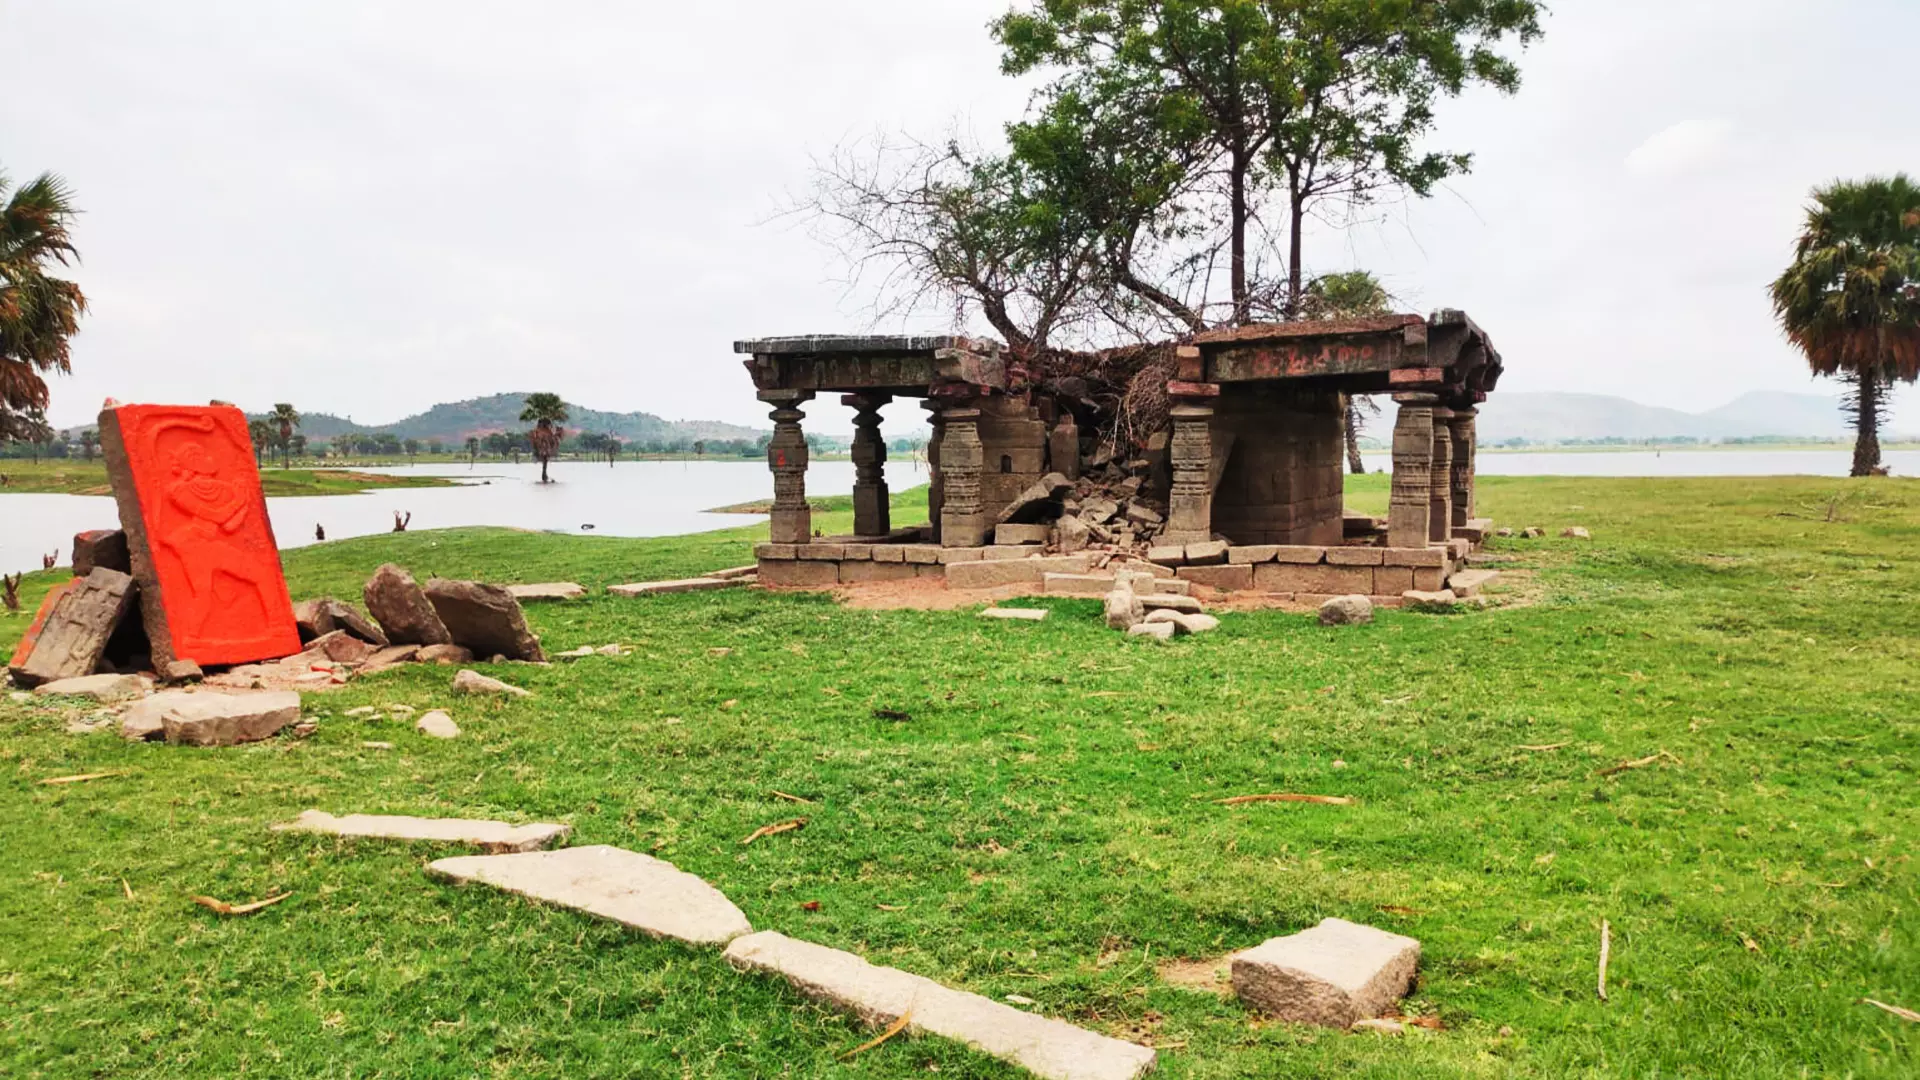 Villagers want to translocate Rajeshwaraswami Temple from the river to their hamlet.